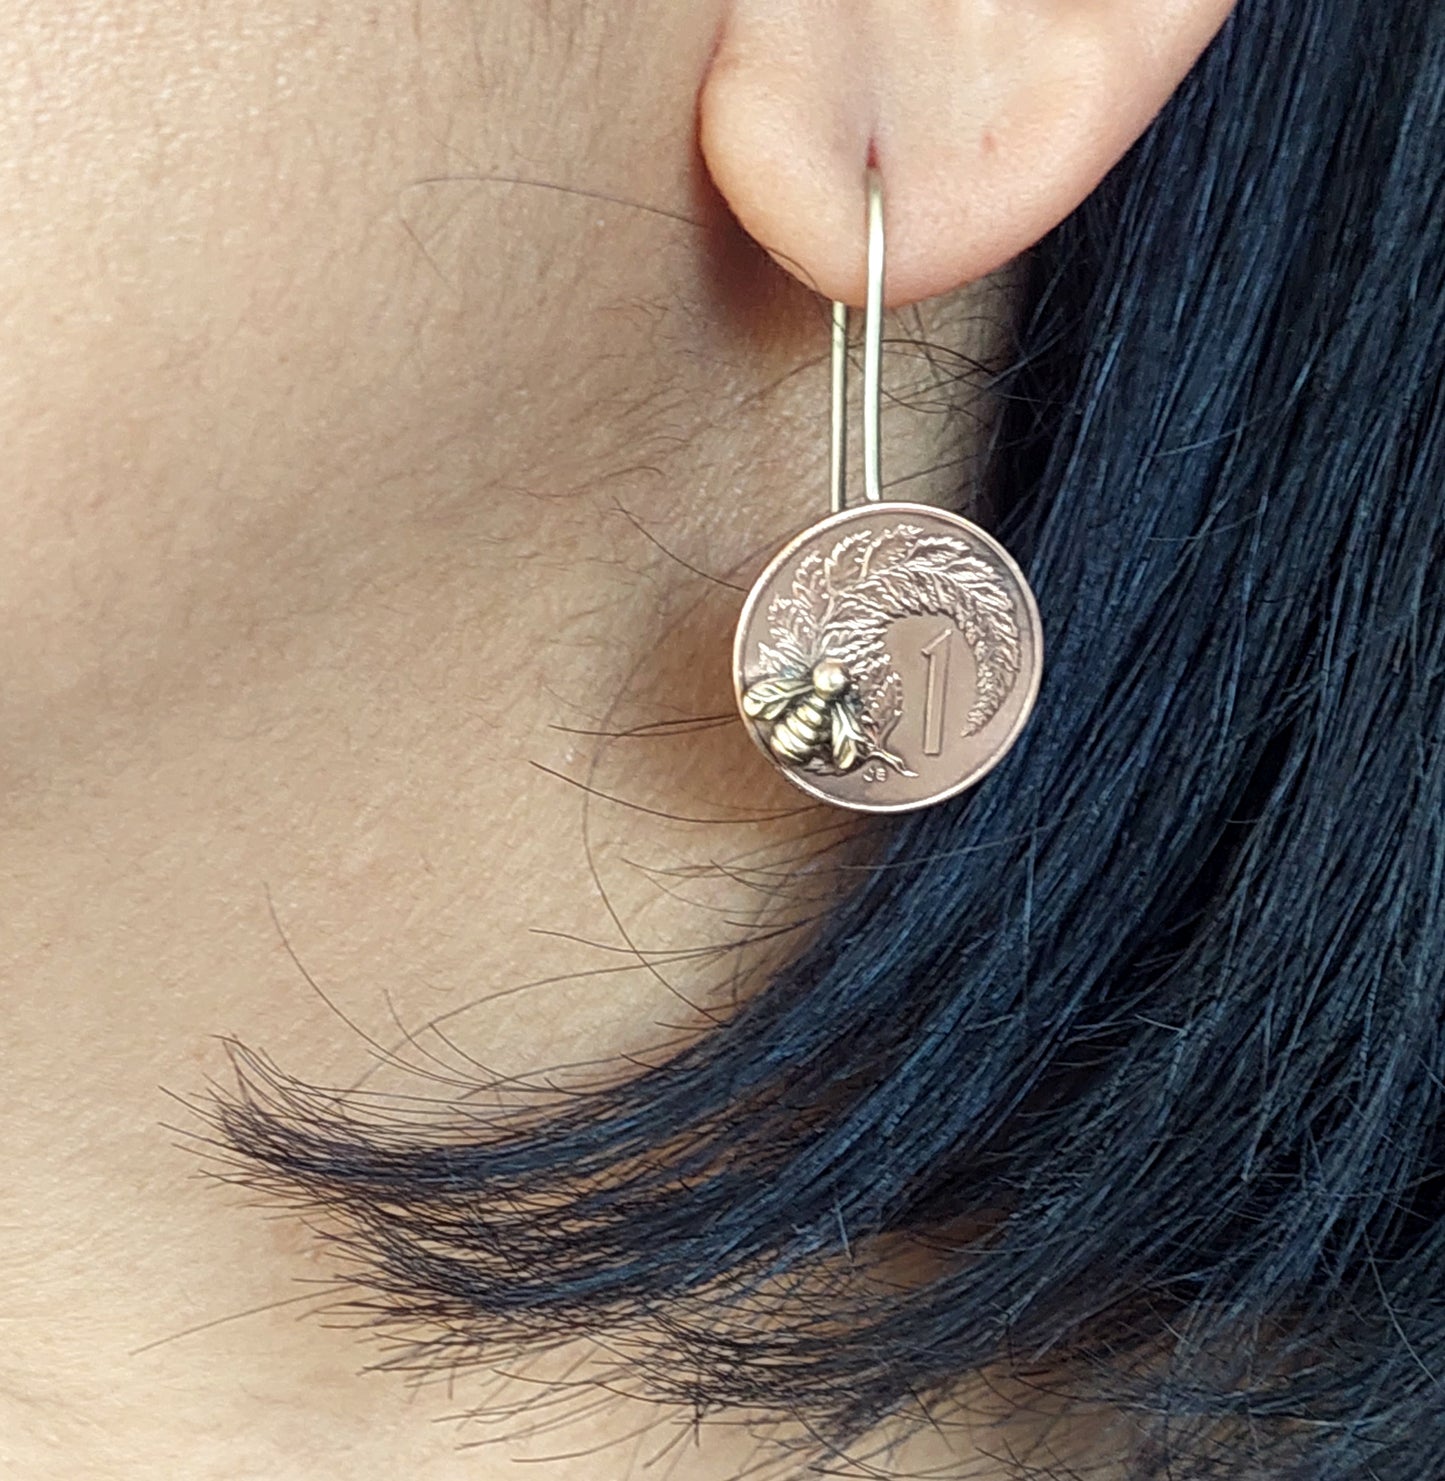 NEW!! Re-minted Artisan Coin Earrings with Tiny Bees - One Cent